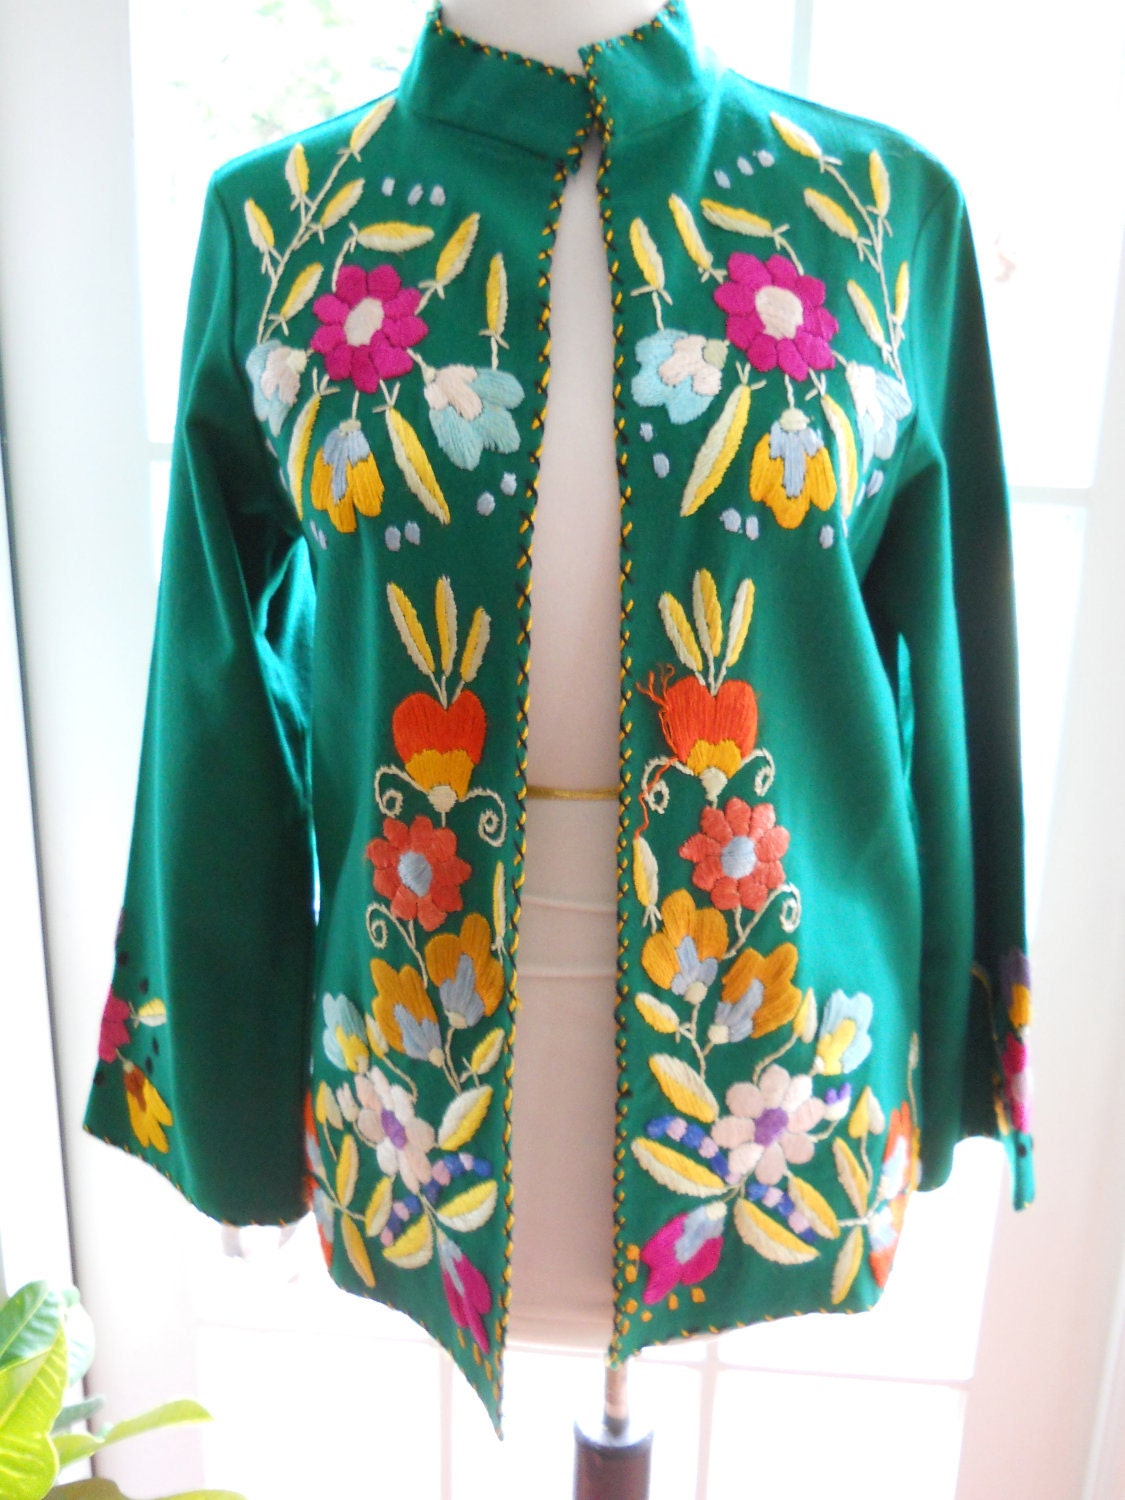 Vintage Mexican wool jacket with floral embroidery: s/m